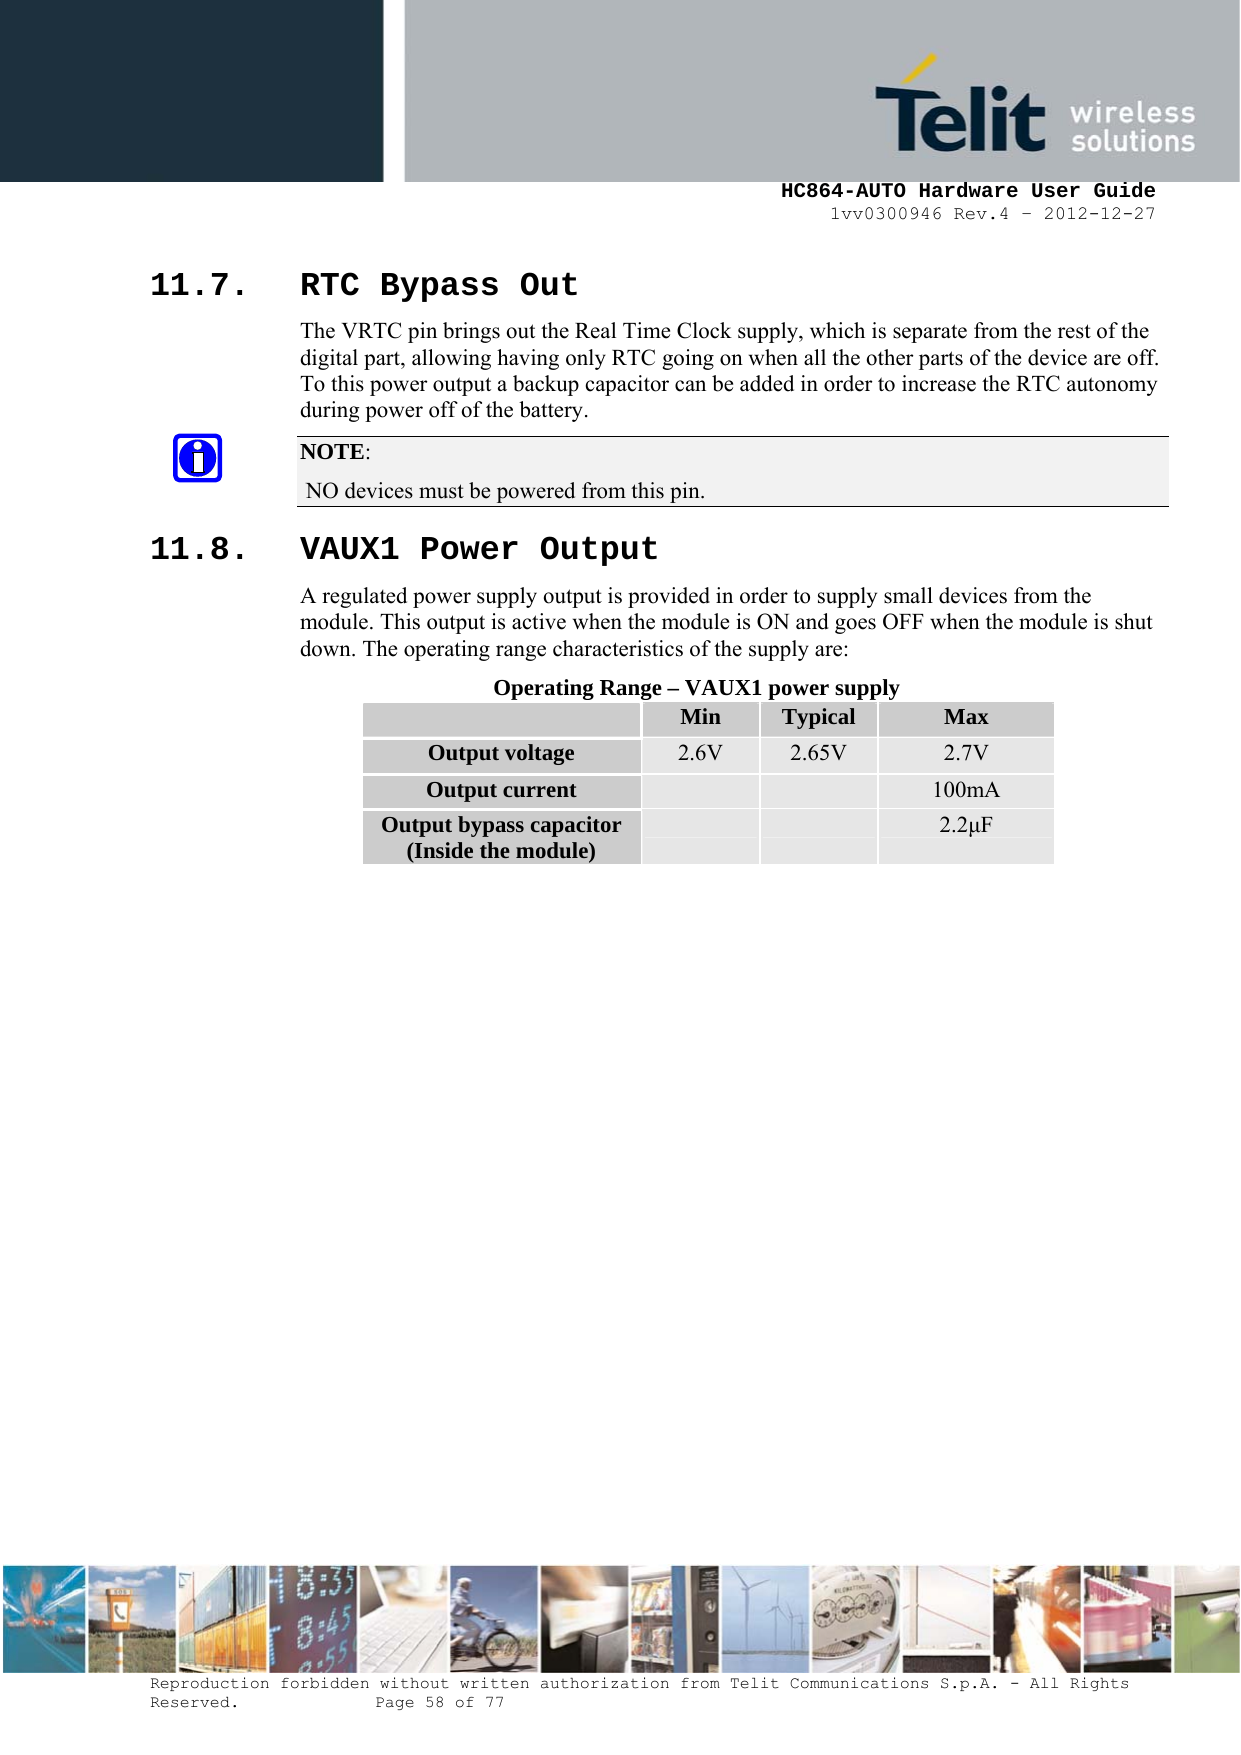     HC864-AUTO Hardware User Guide 1vv0300946 Rev.4 – 2012-12-27 Reproduction forbidden without written authorization from Telit Communications S.p.A. - All Rights Reserved.    Page 58 of 77  11.7. RTC Bypass Out The VRTC pin brings out the Real Time Clock supply, which is separate from the rest of the digital part, allowing having only RTC going on when all the other parts of the device are off. To this power output a backup capacitor can be added in order to increase the RTC autonomy during power off of the battery.  NOTE:  NO devices must be powered from this pin. 11.8. VAUX1 Power Output A regulated power supply output is provided in order to supply small devices from the module. This output is active when the module is ON and goes OFF when the module is shut down. The operating range characteristics of the supply are: Operating Range – VAUX1 power supply  Min  Typical  Max Output voltage  2.6V  2.65V  2.7V Output current      100mA Output bypass capacitor (Inside the module)      2.2F 